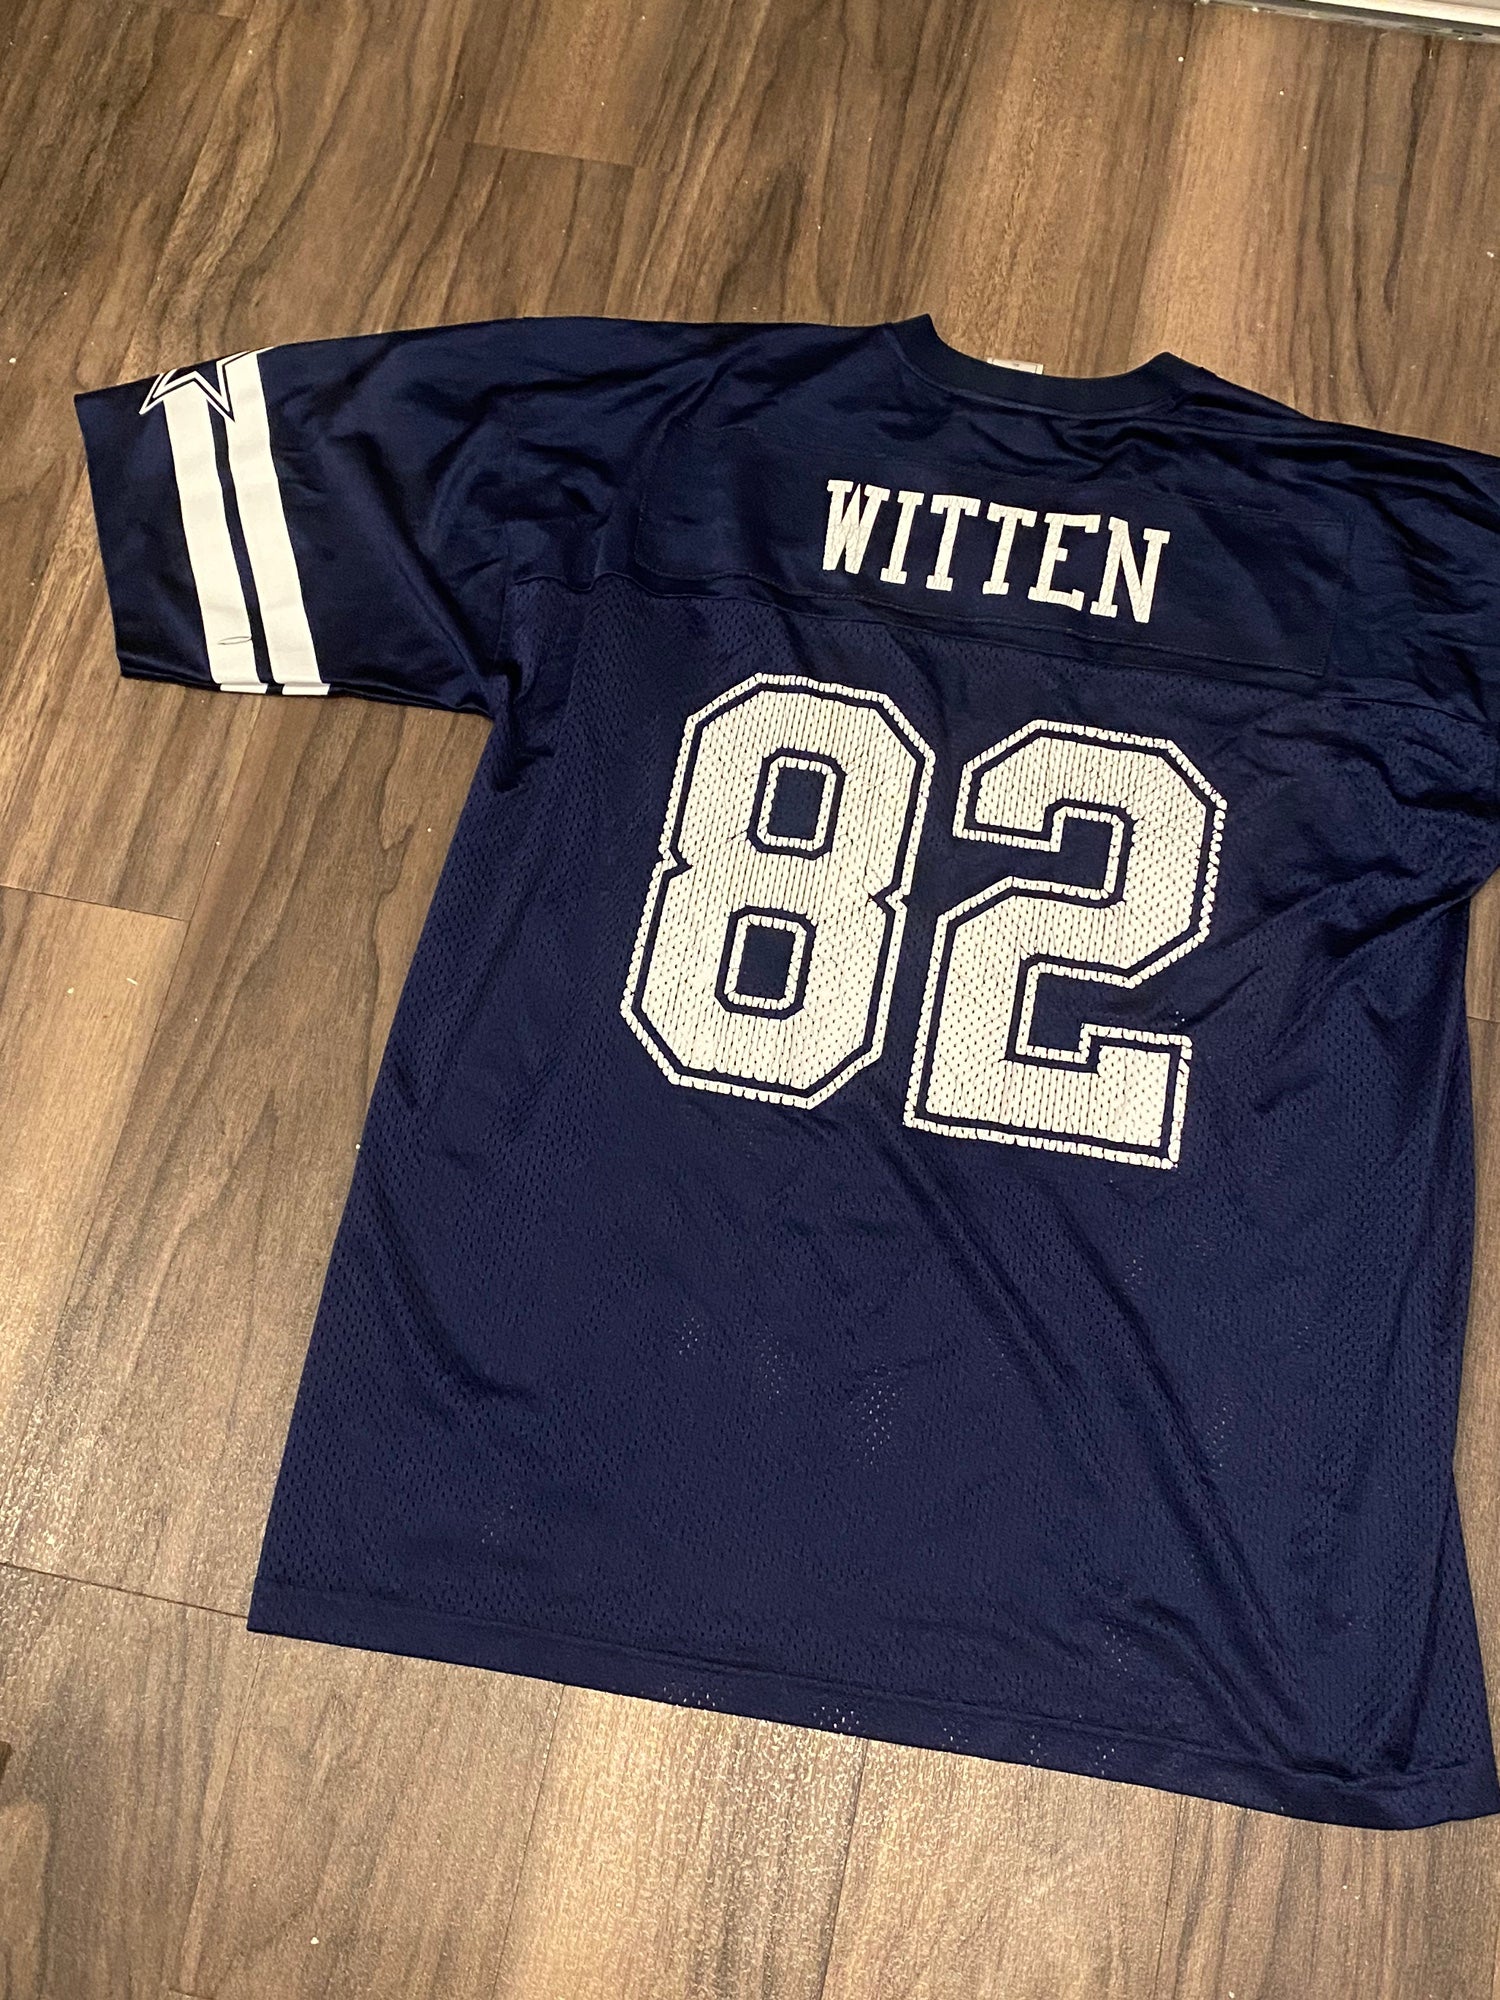 witten signed jersey